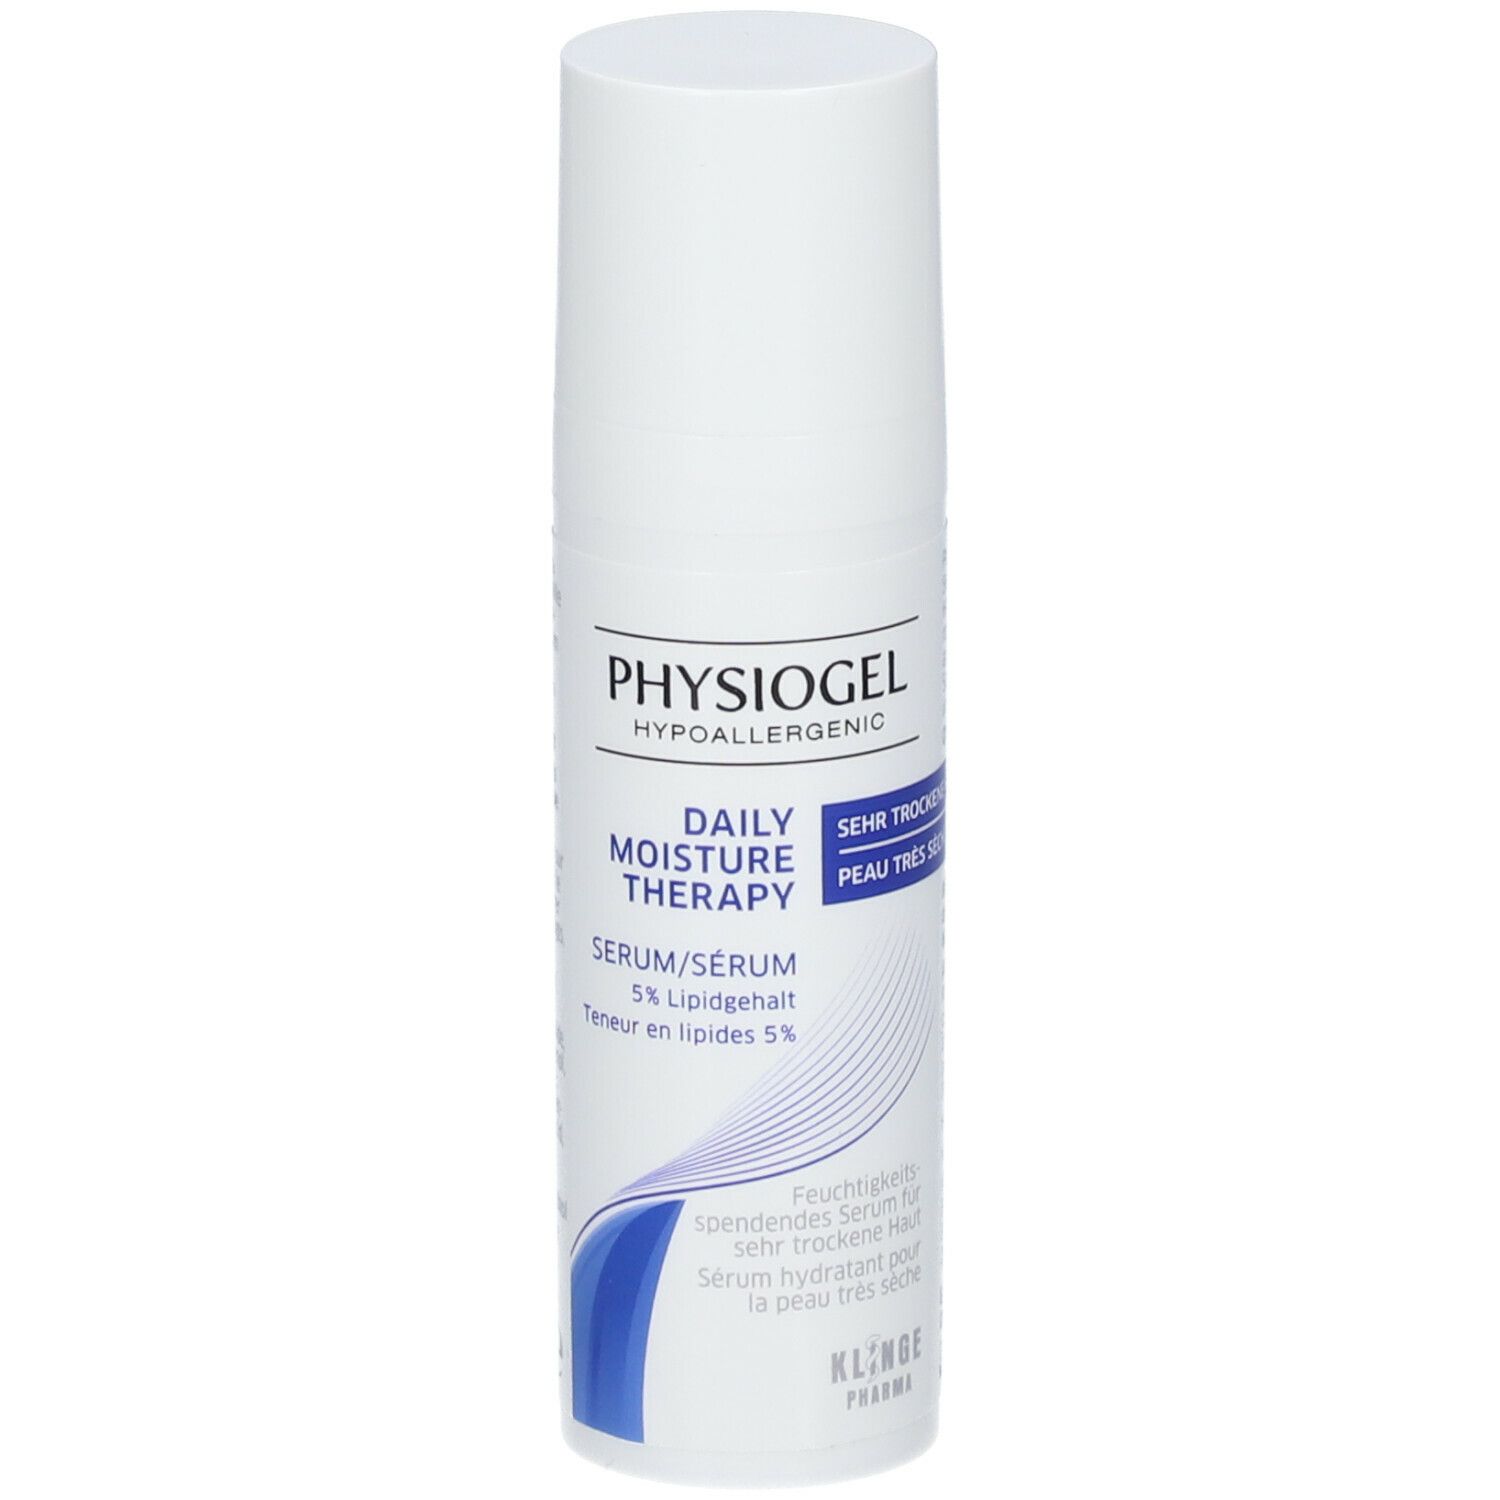 Image of Physiogel Daily Moisture Therapy Serum Sehr trockene Haut